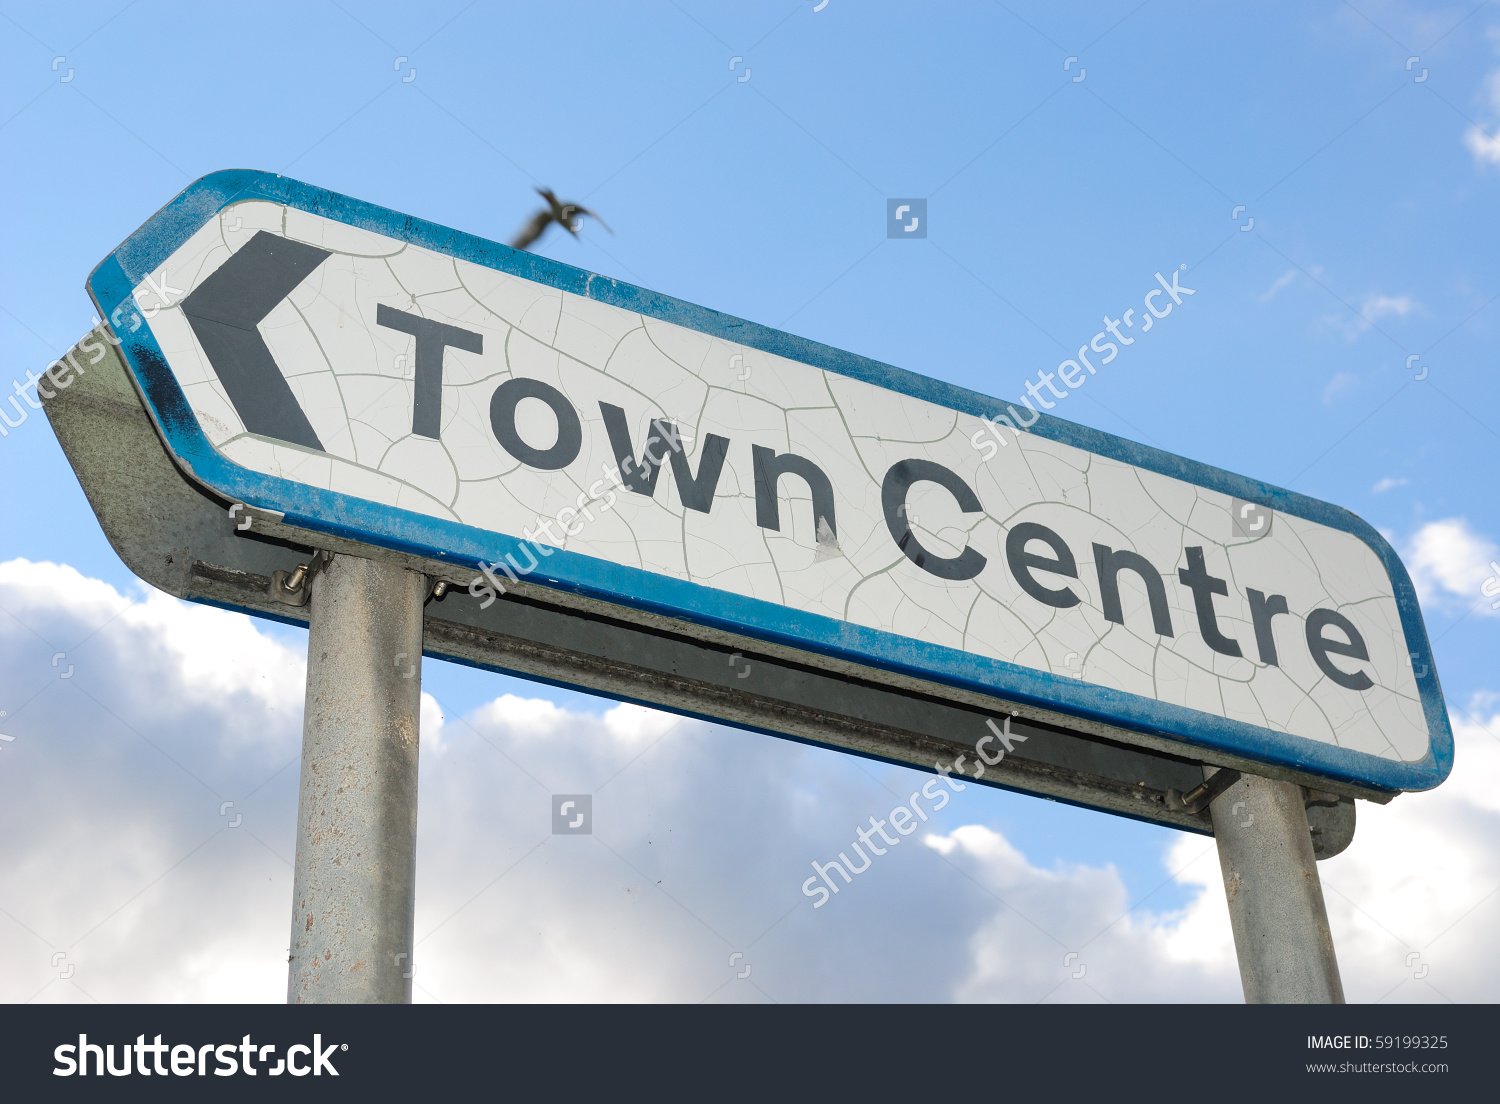 Road Sign Arrow Saying Town Centre Stock Photo 59199325.